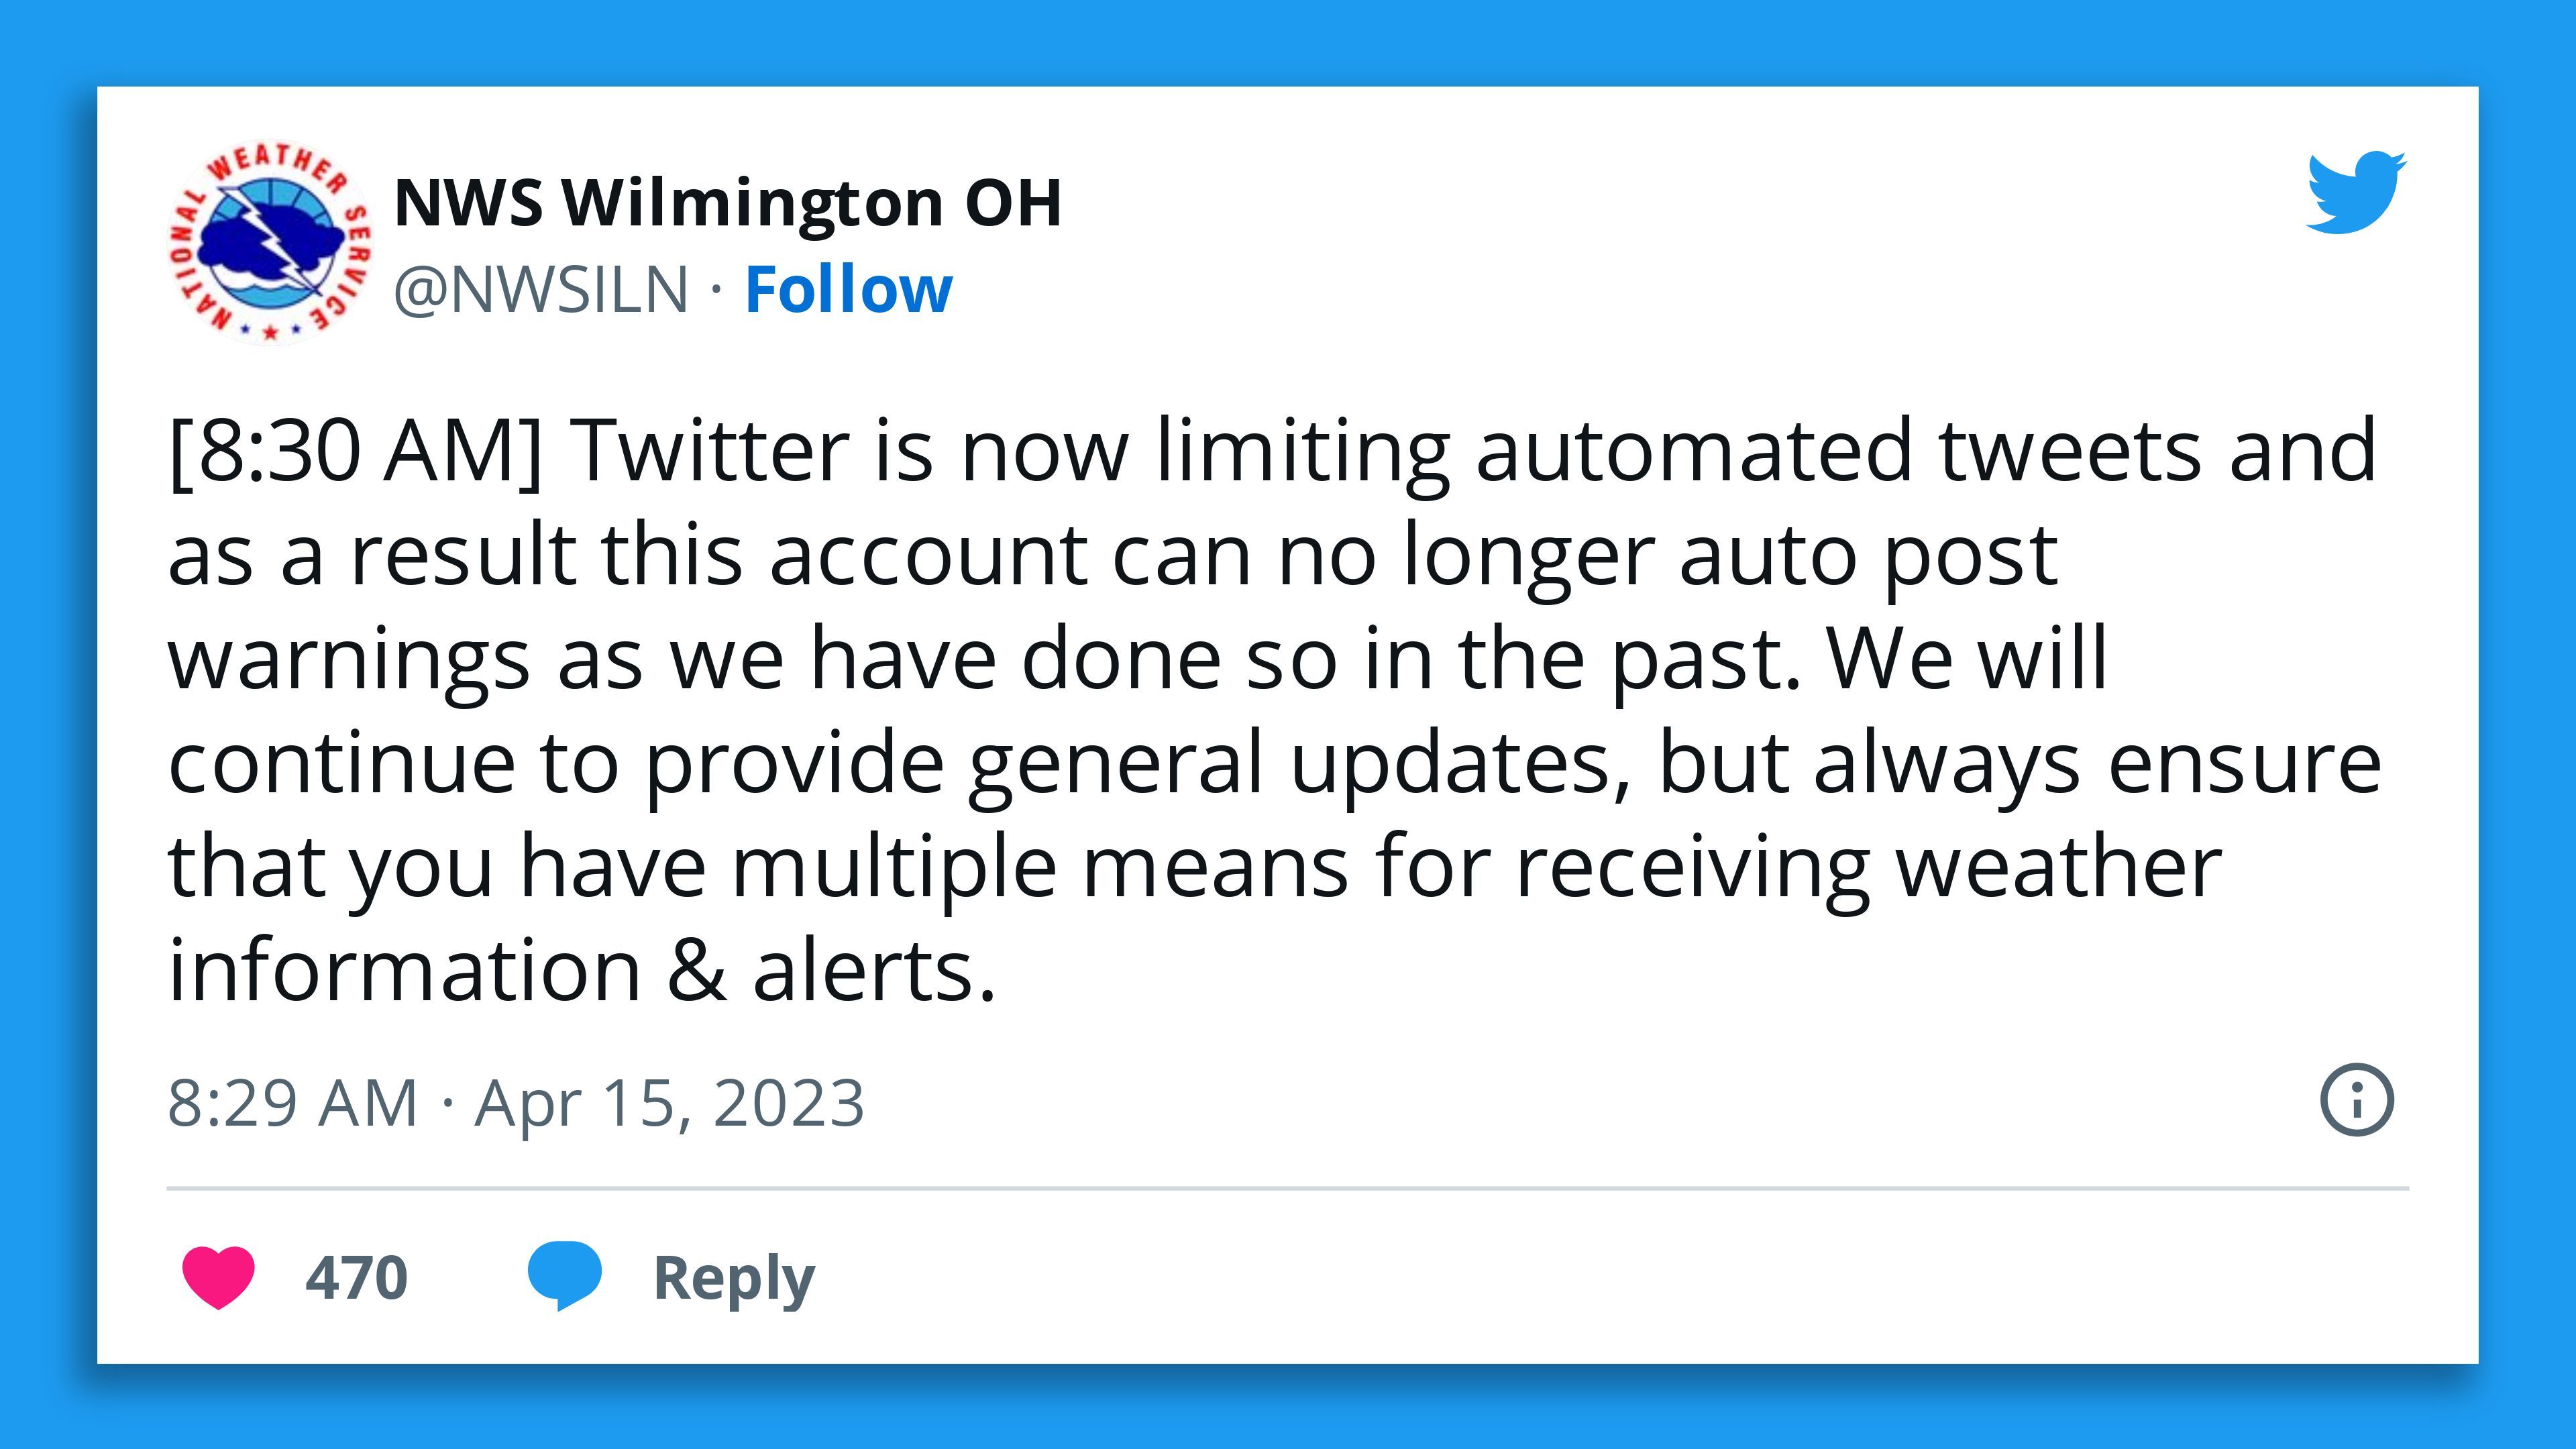 A tweet from the NWS Wilmington OH account reading, "[8:30 AM] Twitter is now limiting automated tweets and as a result this account can no longer auto post warnings as we have done so in the past. We will continue to provide general updates, but always ensure that you have multiple means for receiving weather information & alerts."